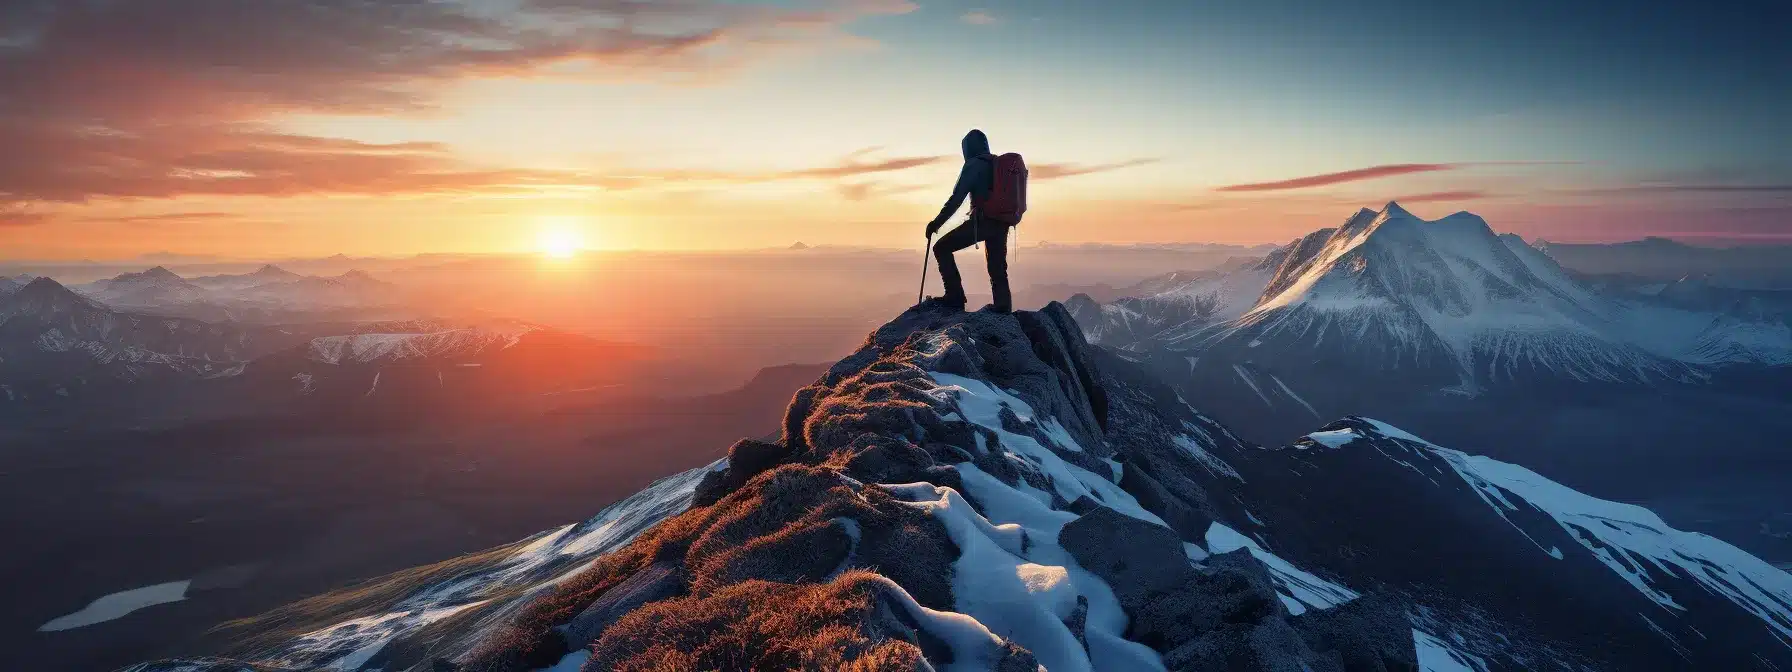 A Person Climbing A Mountain Summit With A Sunset View Of Customer Loyalty And Brand Affinity From The Top.